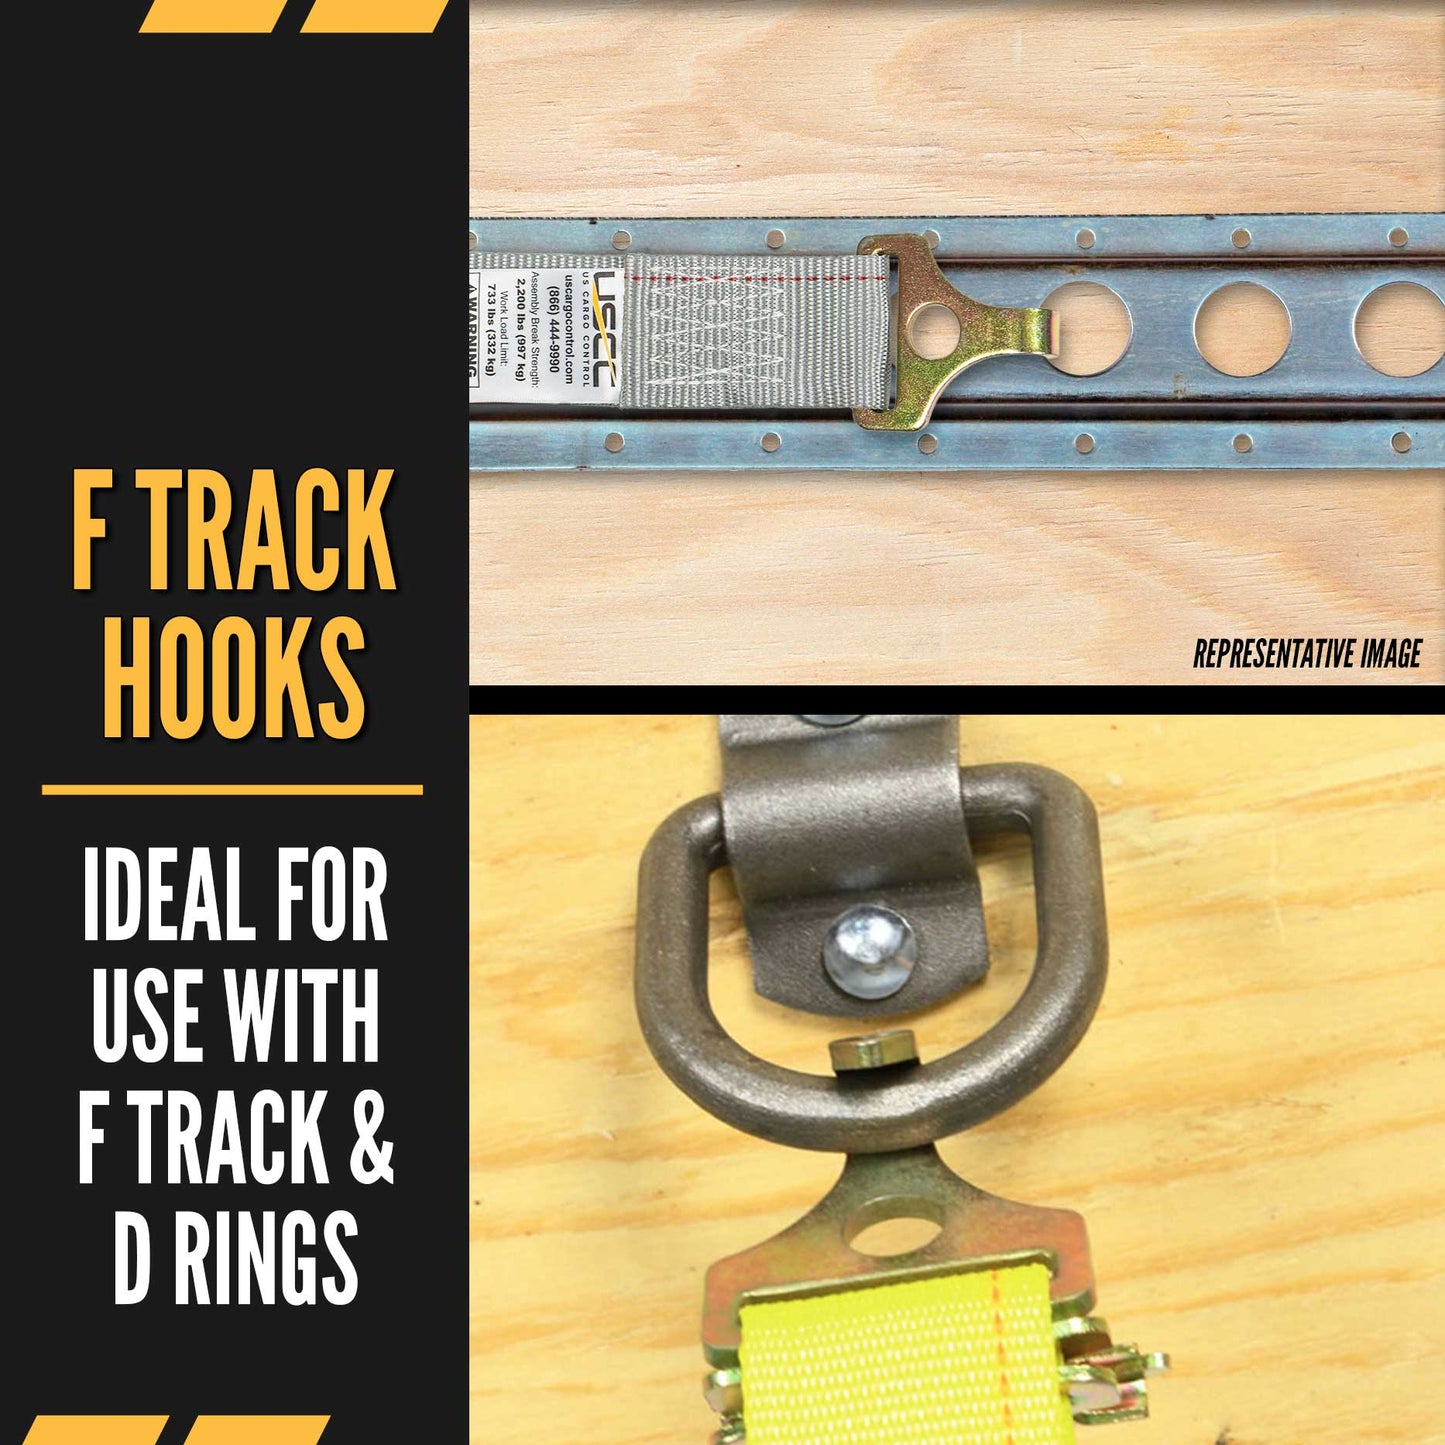 12' ratchet strap -  f track hooks are ideal for use with F track and D rings